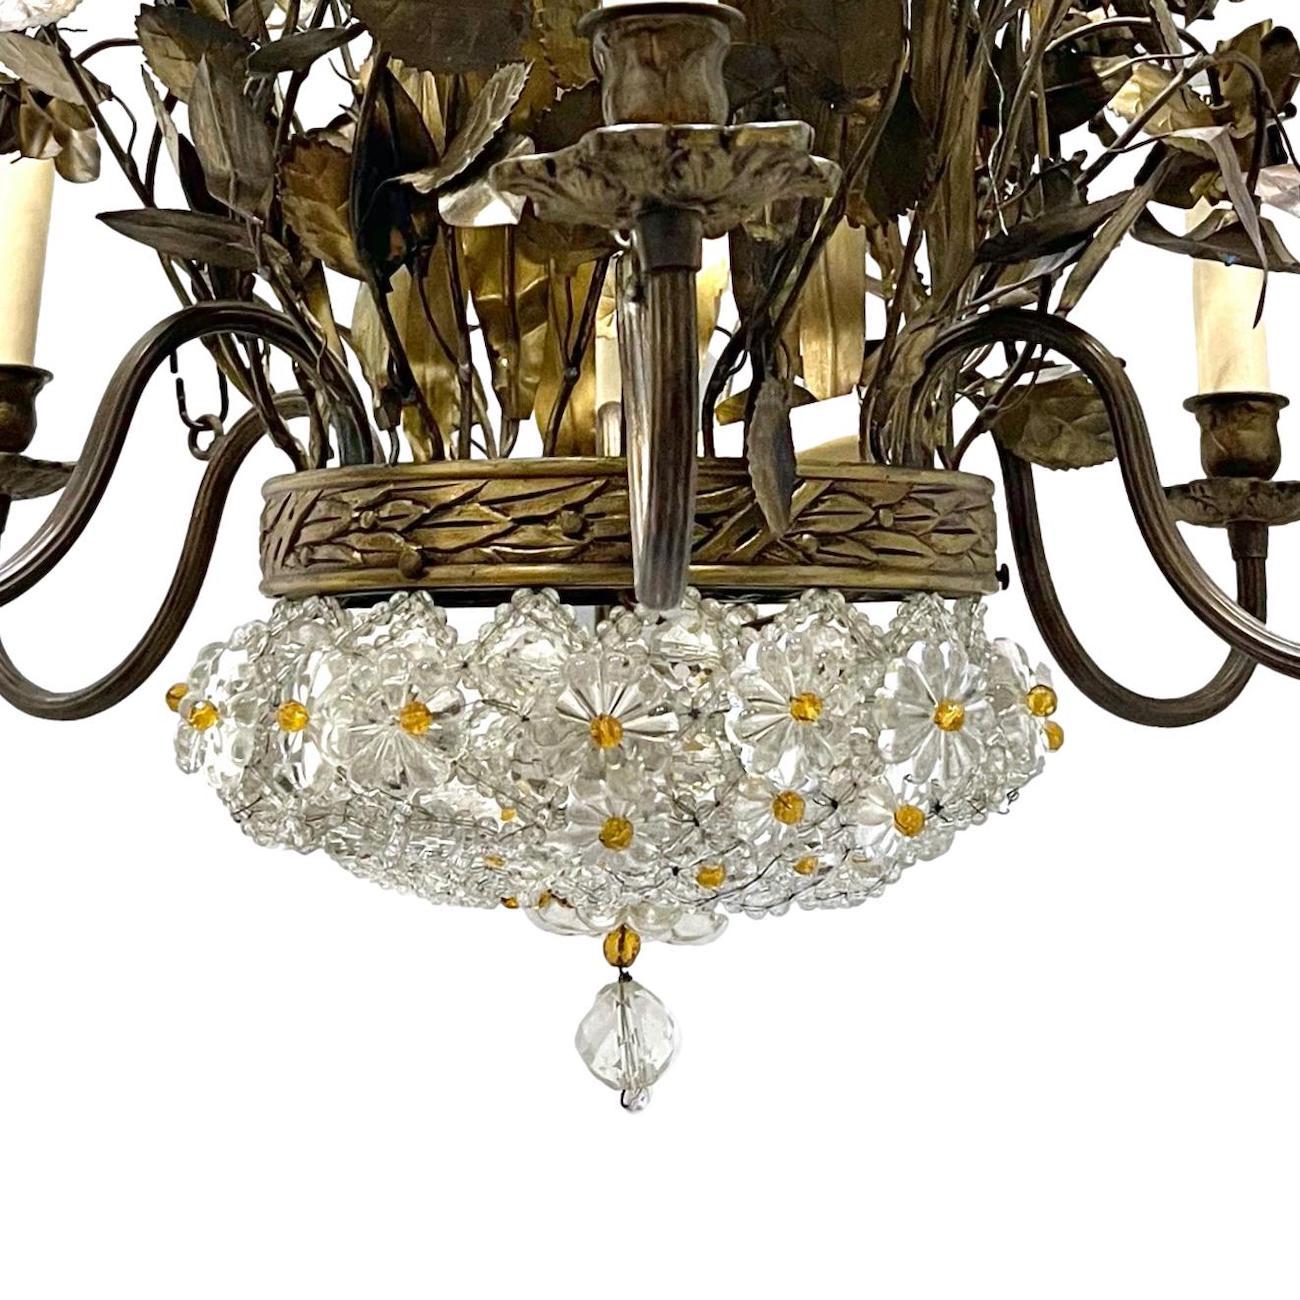 A circa 1940's French patinated bronze six-arm floral motif chandelier with molded glass and amber crystal body that has an interior light.

Measurements:
Drop: 34